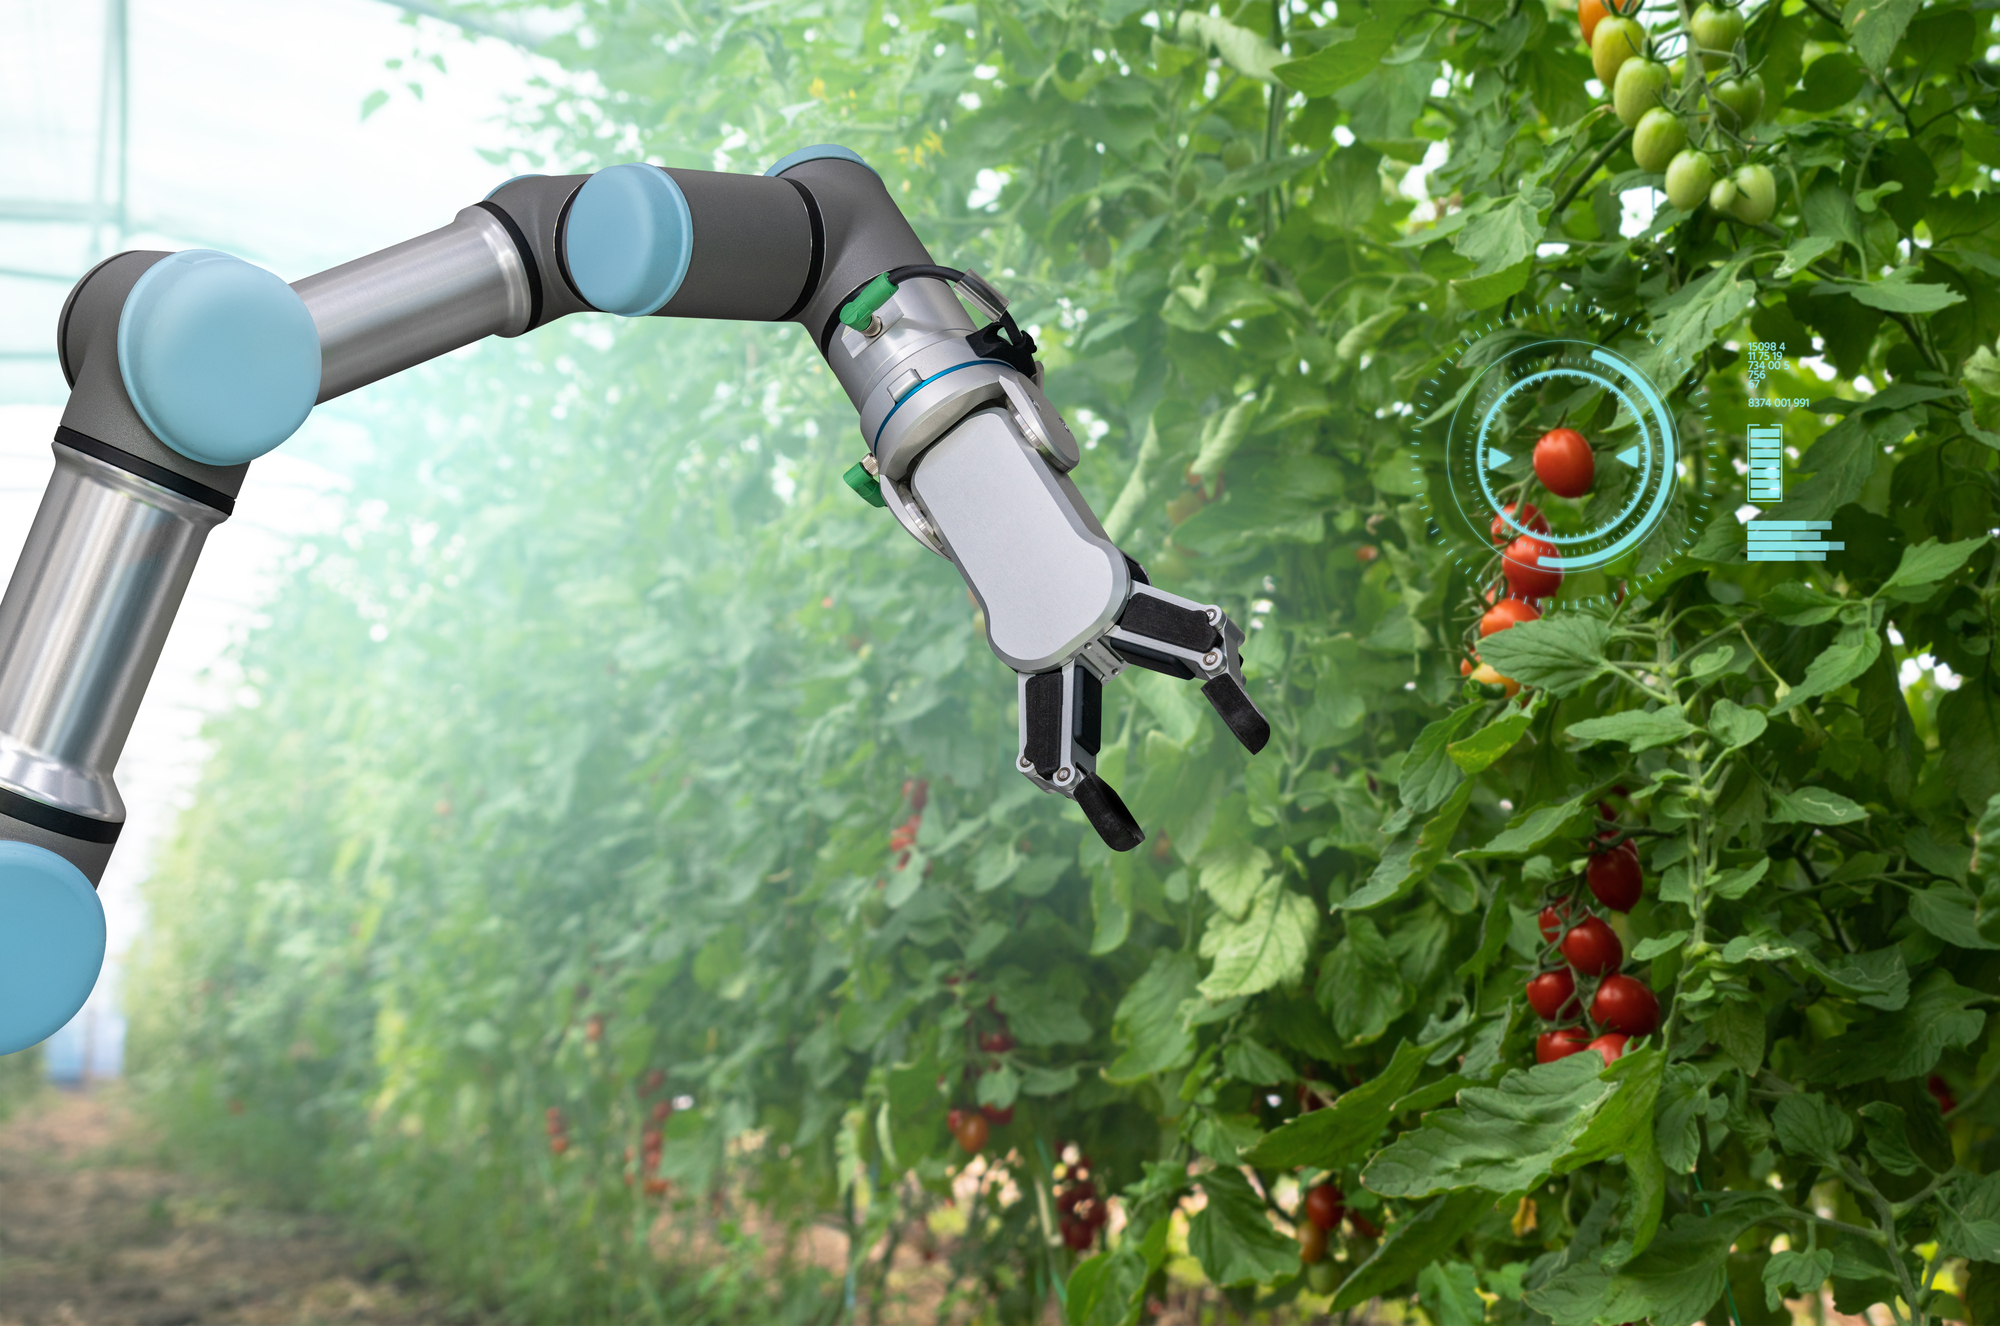 Robot Is Working In Greenhouse With Tomatoes